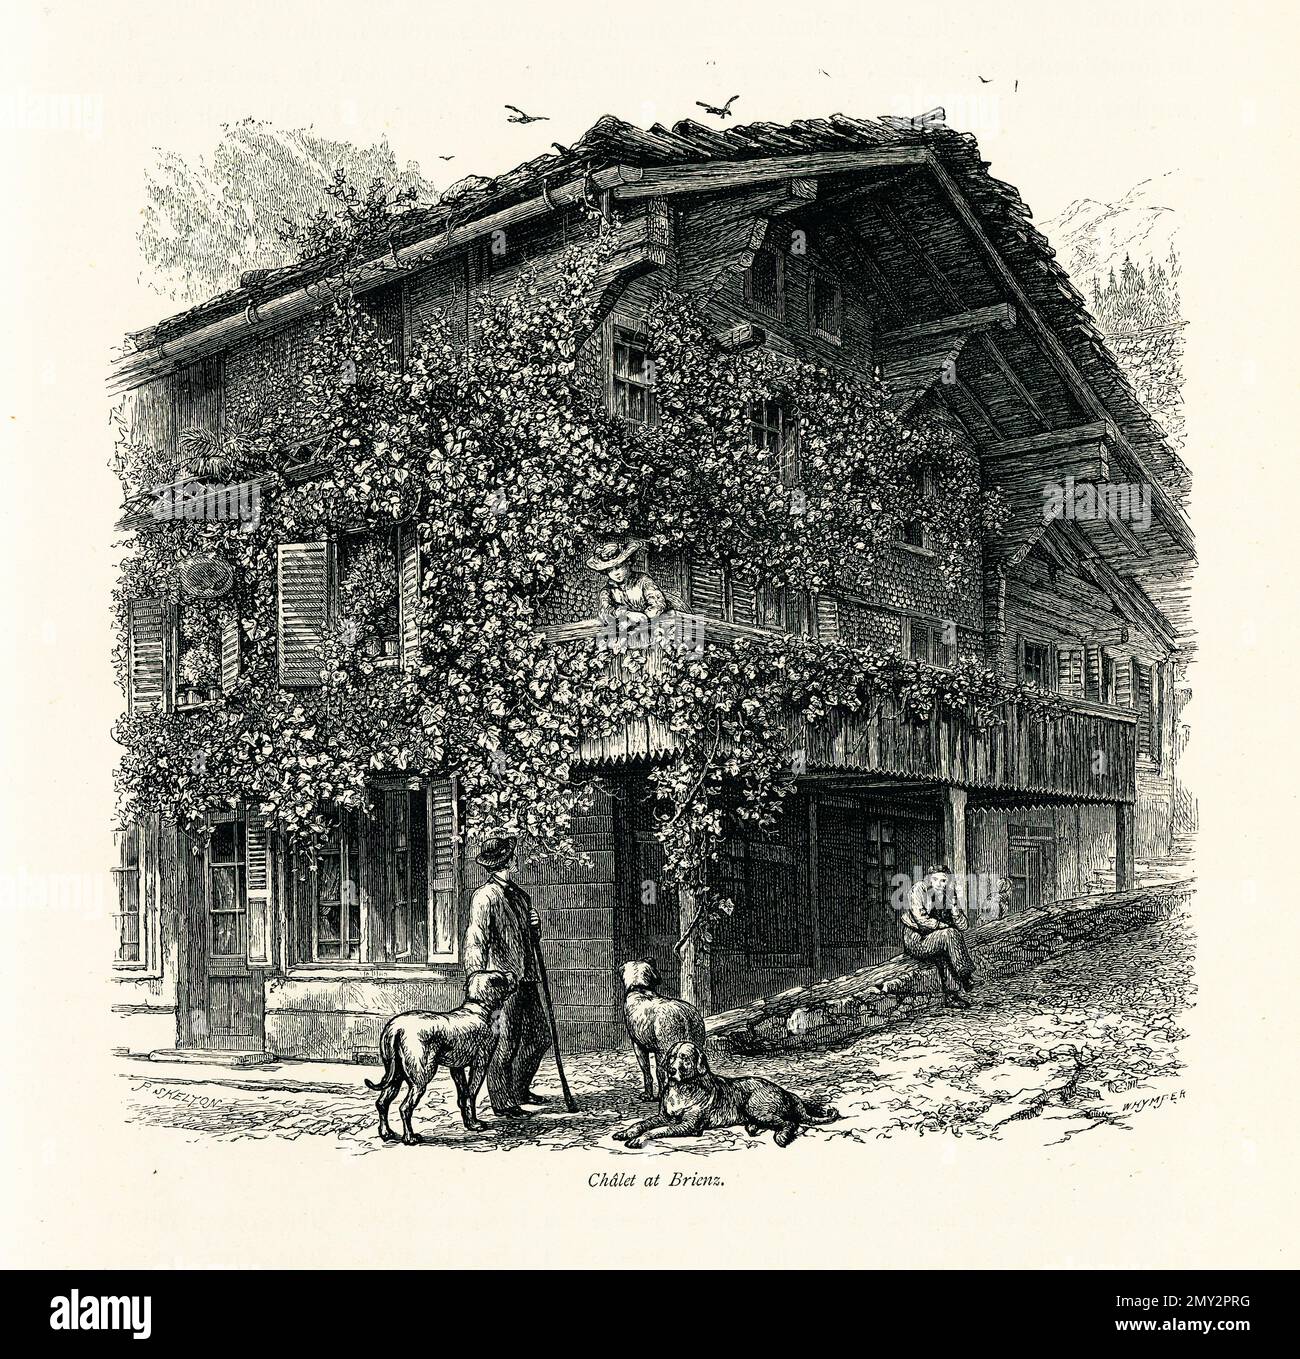 Antique engraving of a chalet at Brienz, canton of Bern, Switzerland. Illustration published in Picturesque Europe, Vol. III (Cassell & Company, Limit Stock Photo